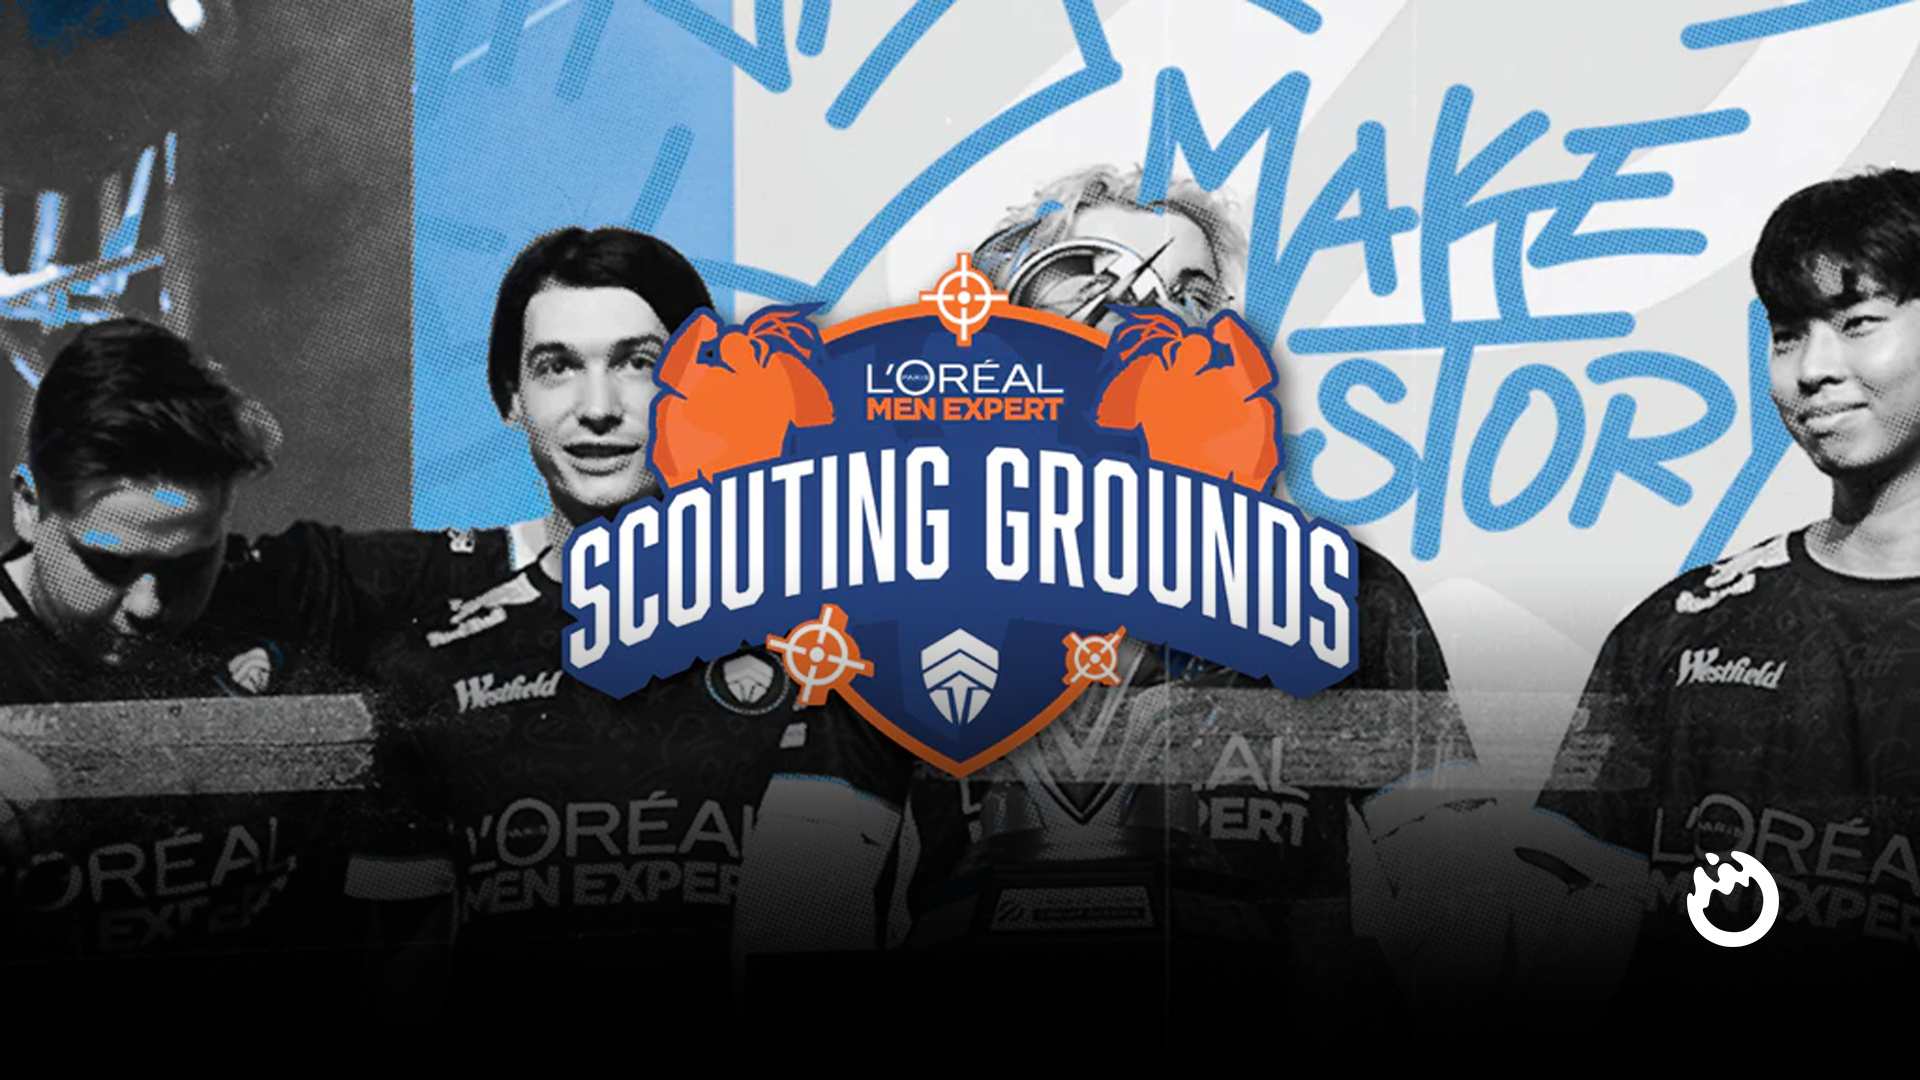 Chiefs lead OCE LoL academy initiative with L’Oreal Men Expert Scouting Grounds